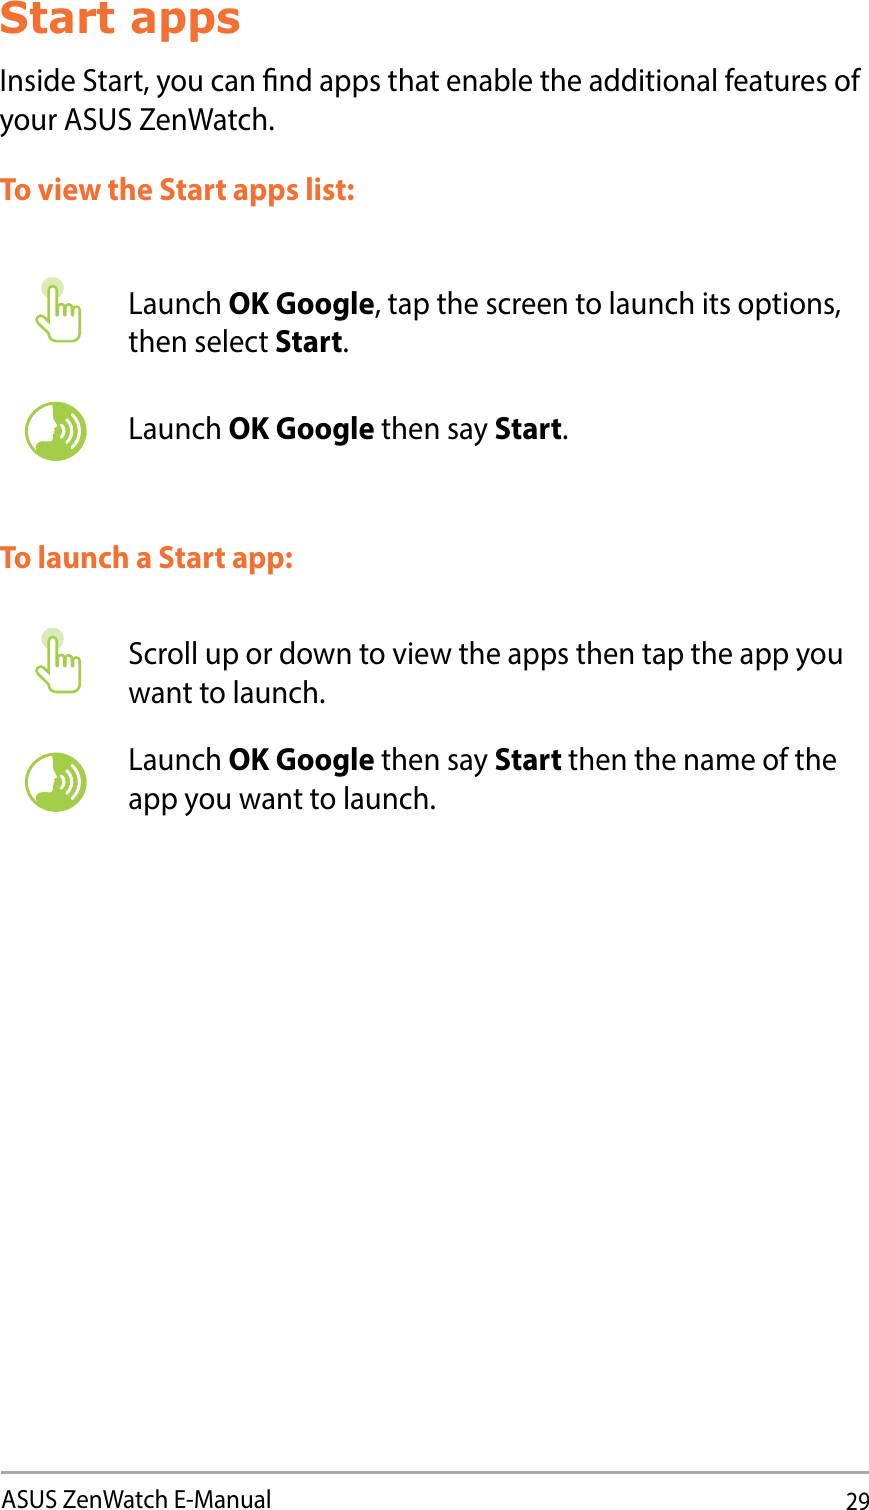 29ASUS ZenWatch E-ManualStart appsInside Start, you can nd apps that enable the additional features of your ASUS ZenWatch. To launch a Start app:Launch OK Google, tap the screen to launch its options, then select Start.Launch OK Google then say Start.Scroll up or down to view the apps then tap the app you want to launch.Launch OK Google then say Start then the name of the app you want to launch.To view the Start apps list: